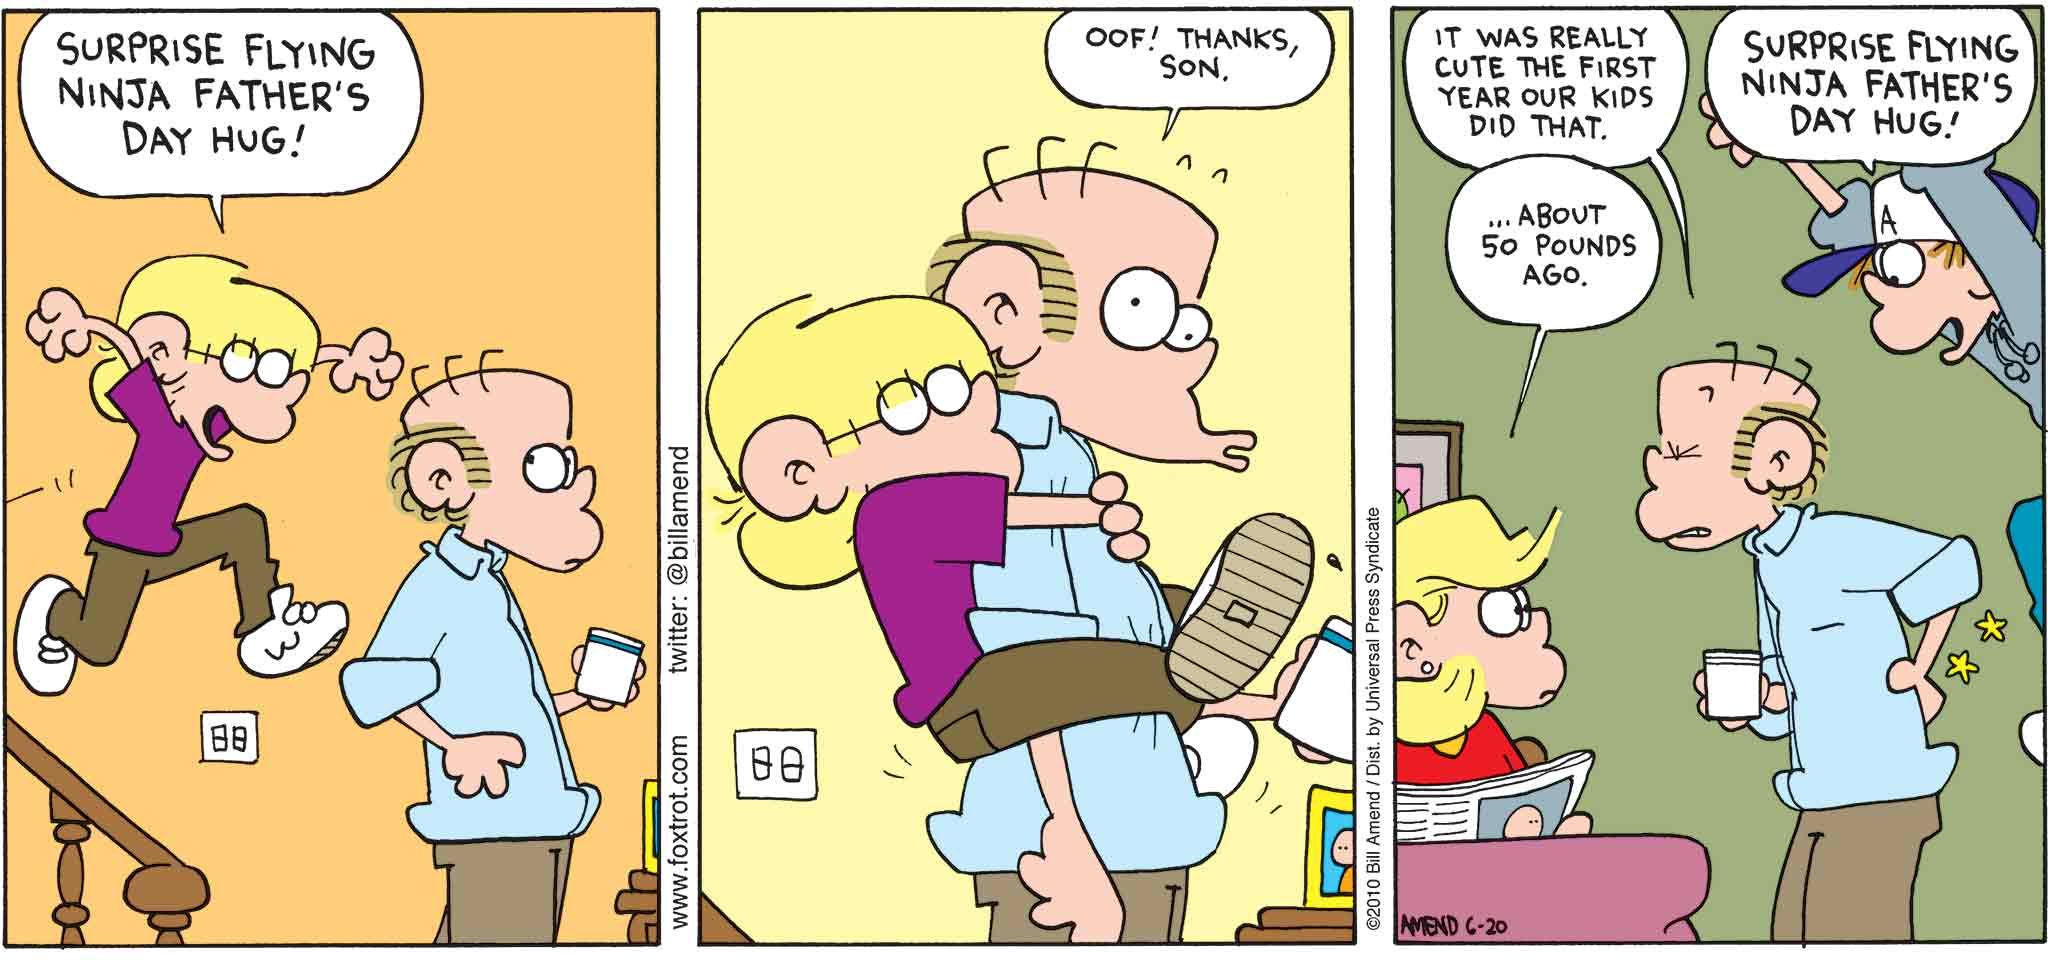 FoxTrot by Bill Amend - Father's Day comic published June 20, 2010 - Jason: Surprise flying ninja Father's Day hug! Roger: Oof! Thanks, son. Roger: It was really cute the first year our kids did that. Andy: ...about 50 pounds ago. Peter: Surprise flying ninja Father's Day hug!